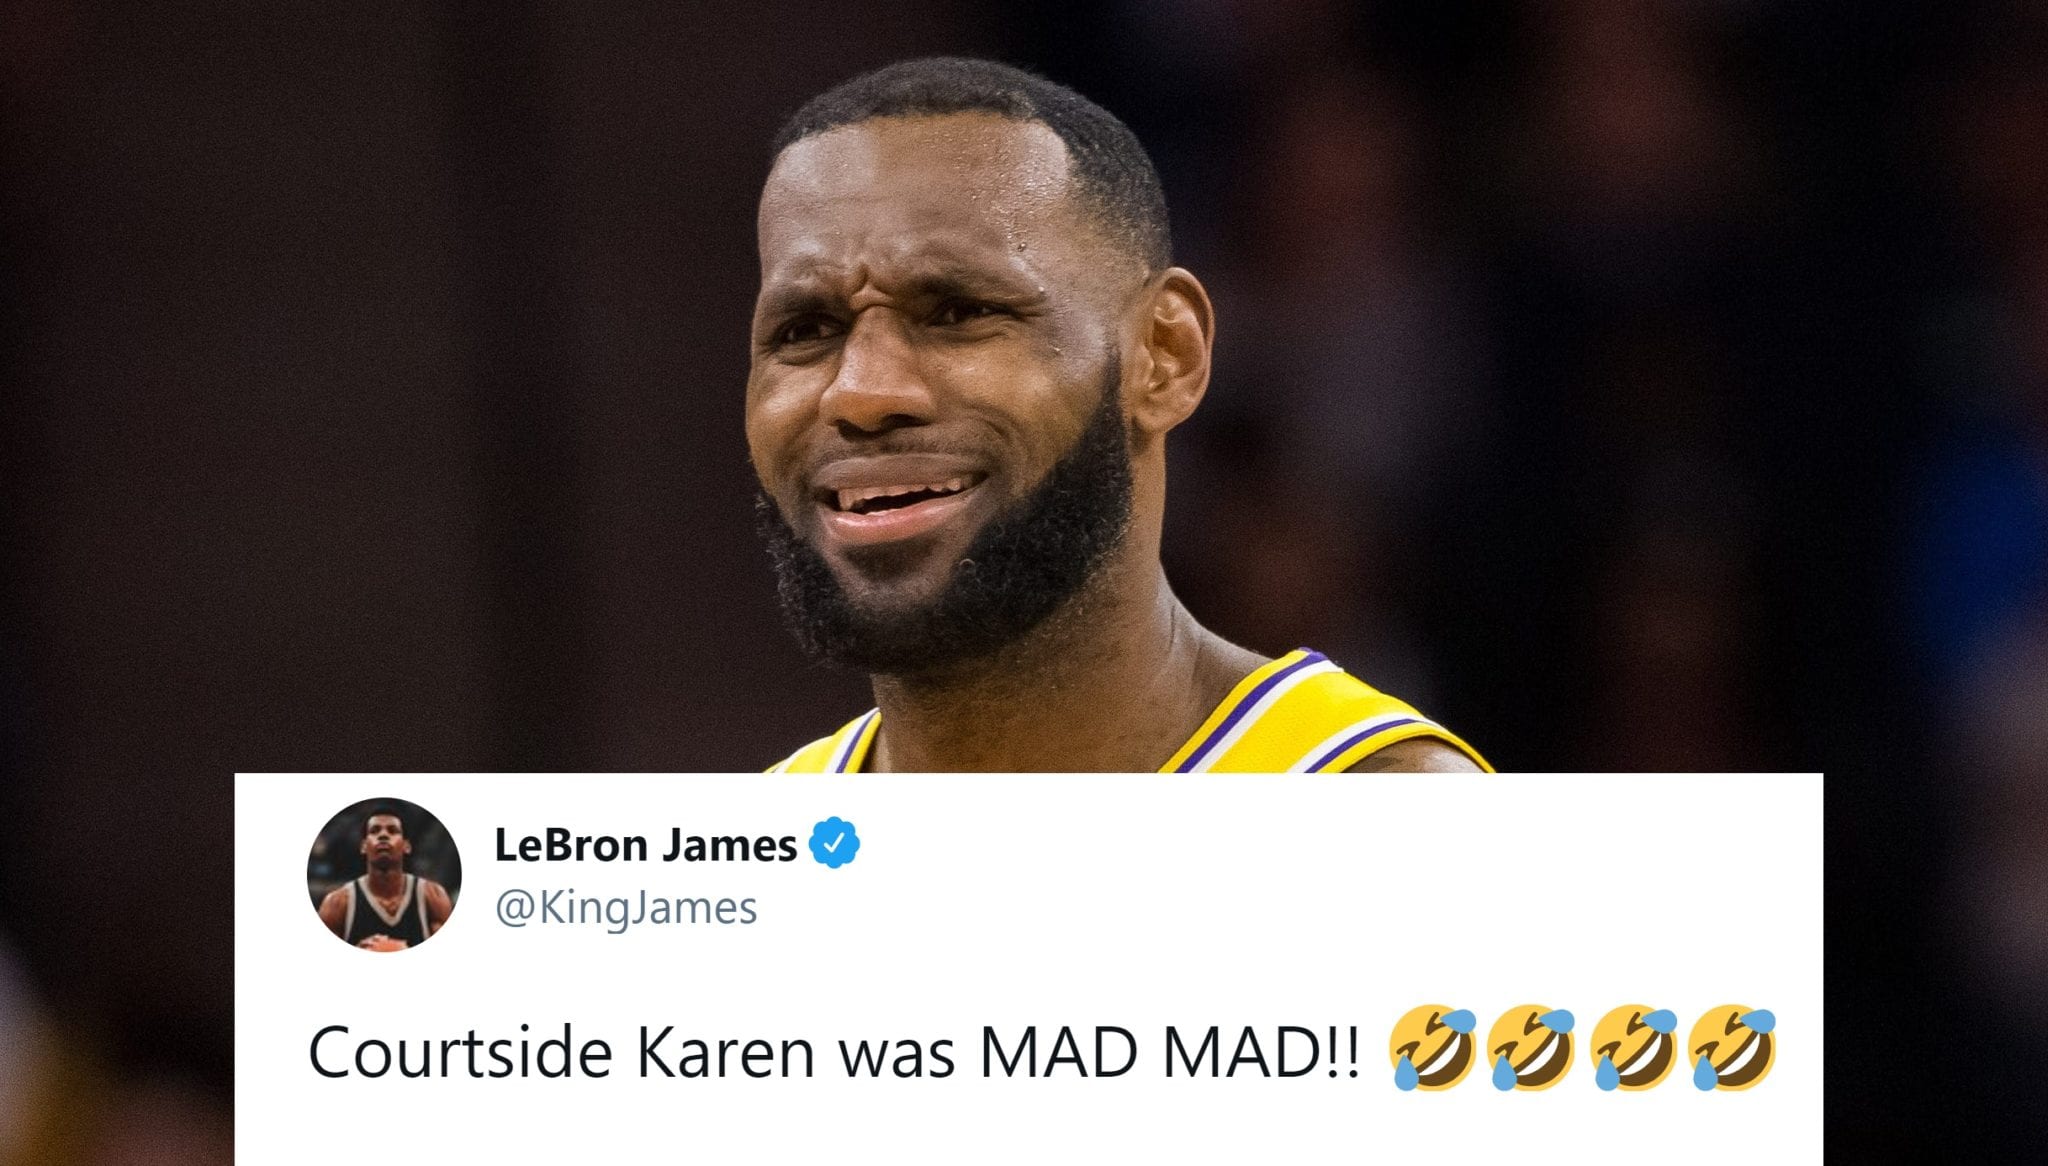 LeBron James Gets Into Verbal Altercation With ‘Courtside Karen’